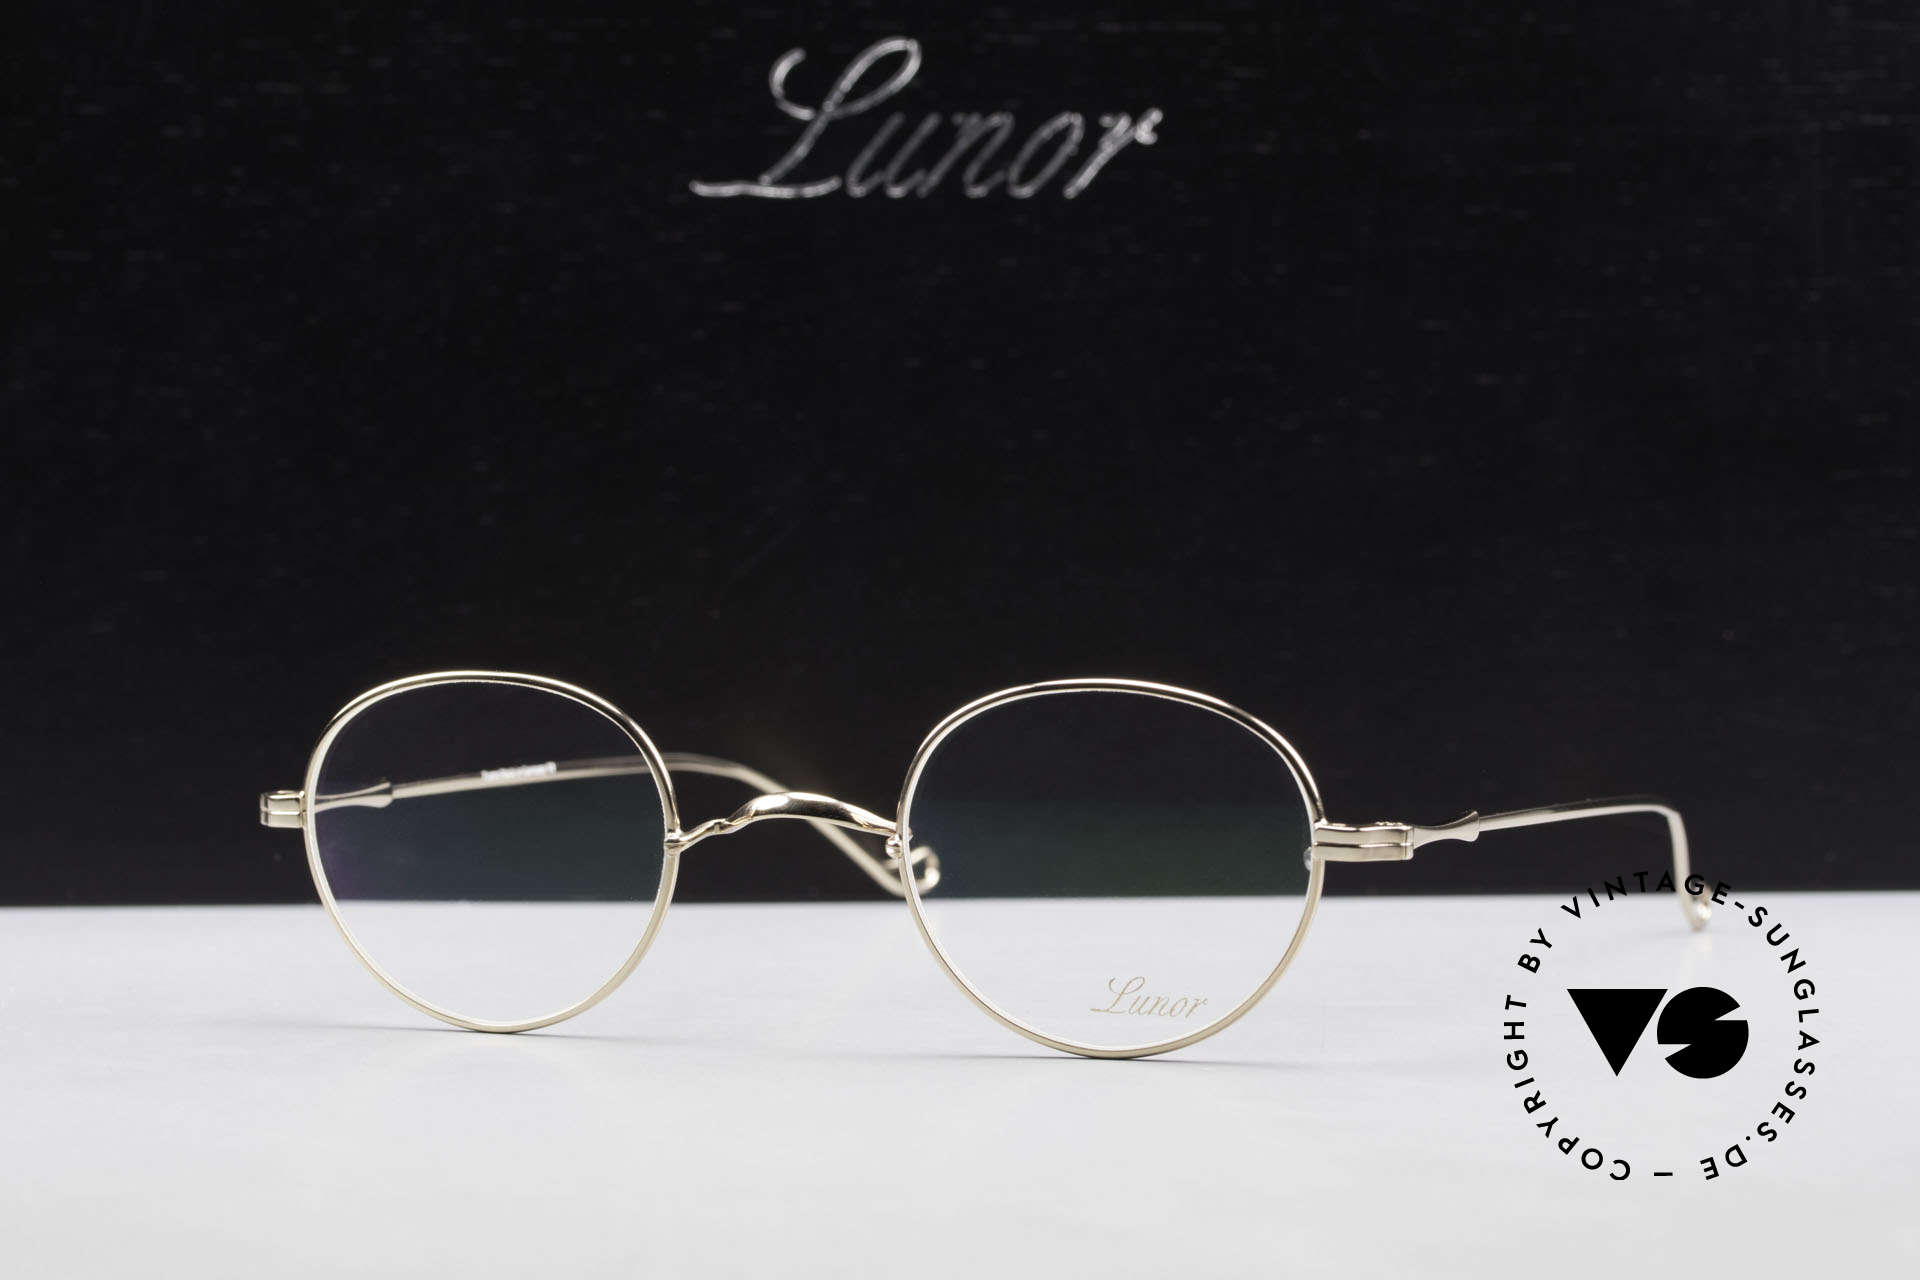 Lunor II 22 Lunor Eyeglasses Gold Plated, Size: medium, Made for Men and Women